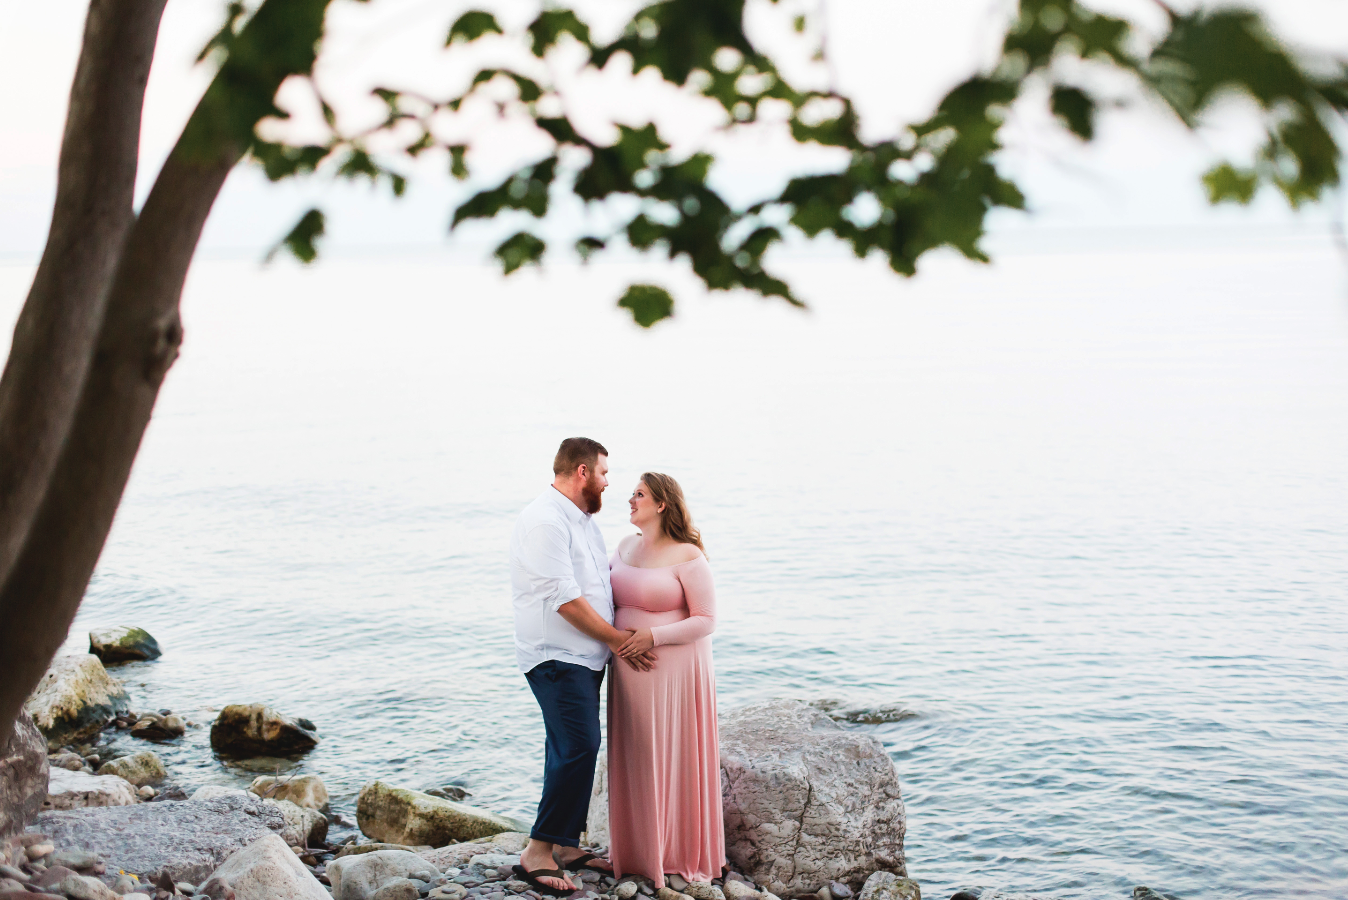 Maternity-Session-Photographer-Hamilton-Oakville-Waterfront-Golden-Hour-Glow-Photography-Moments-by-Lauren-Photo-Image-18.png